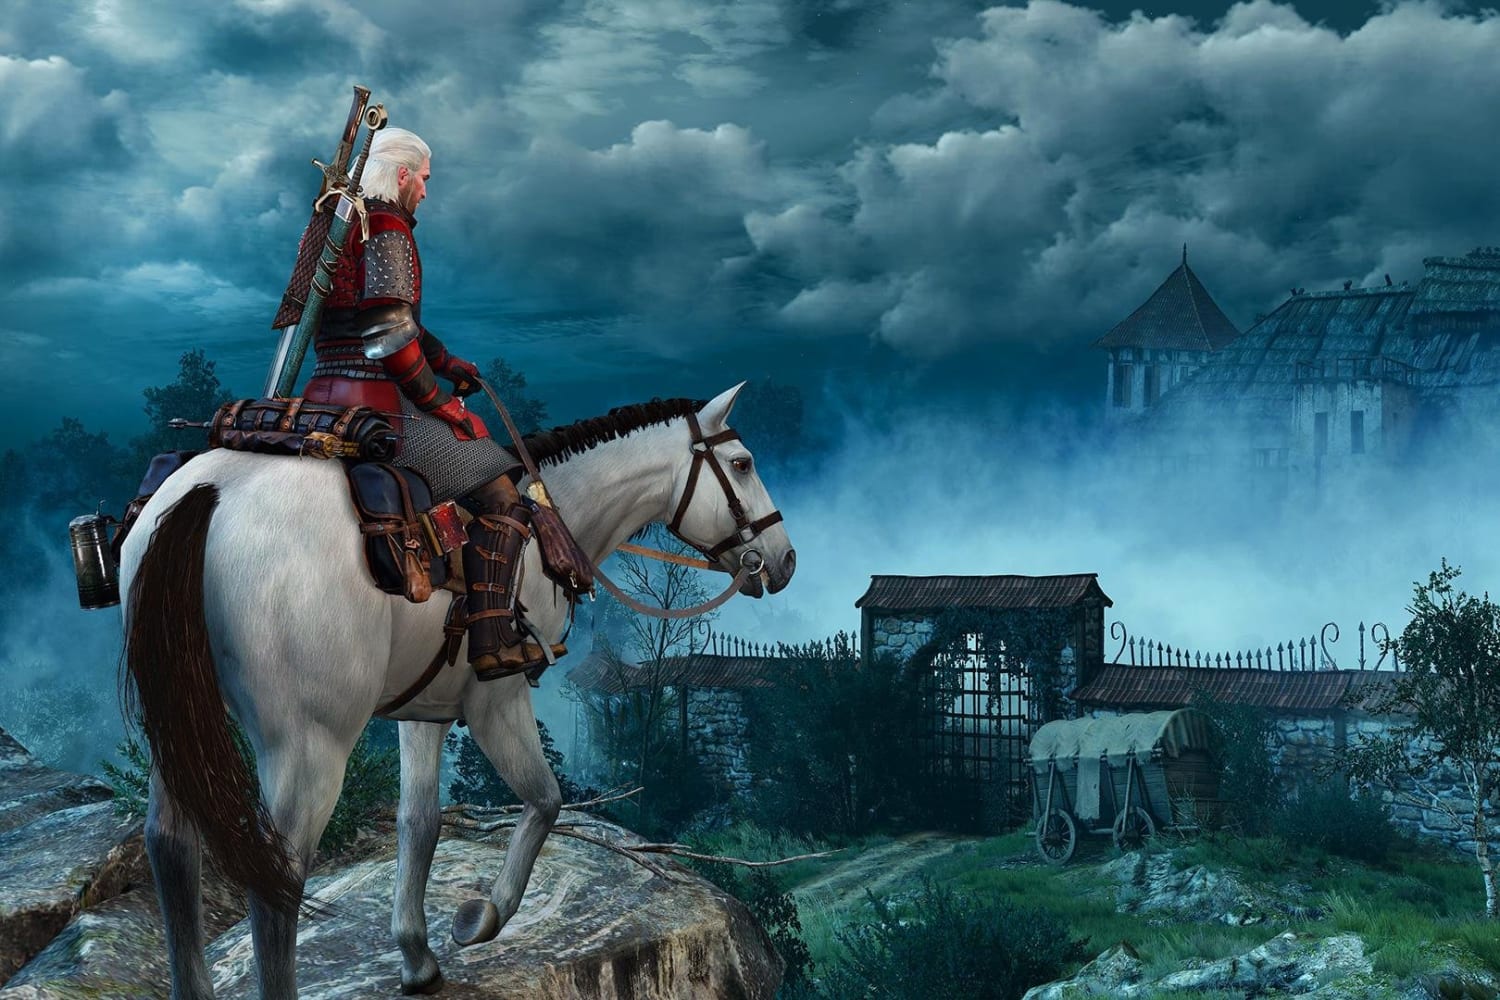 The Witcher: 10 Characters Fans Of The Games Will Recognize